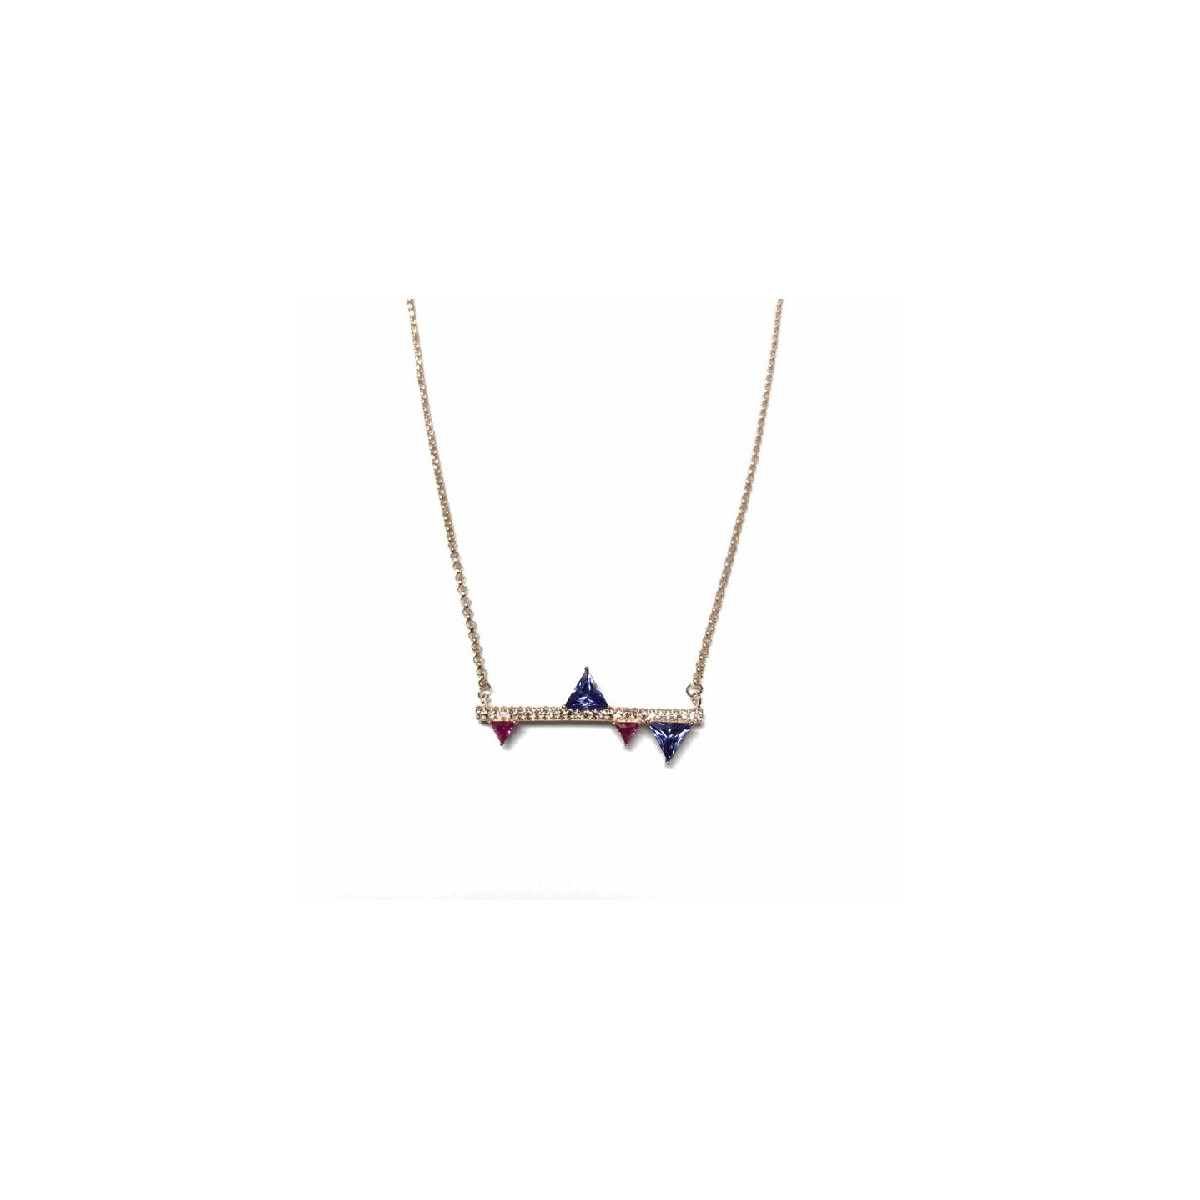 LINEARGENT NECKLACE - 16248-PE